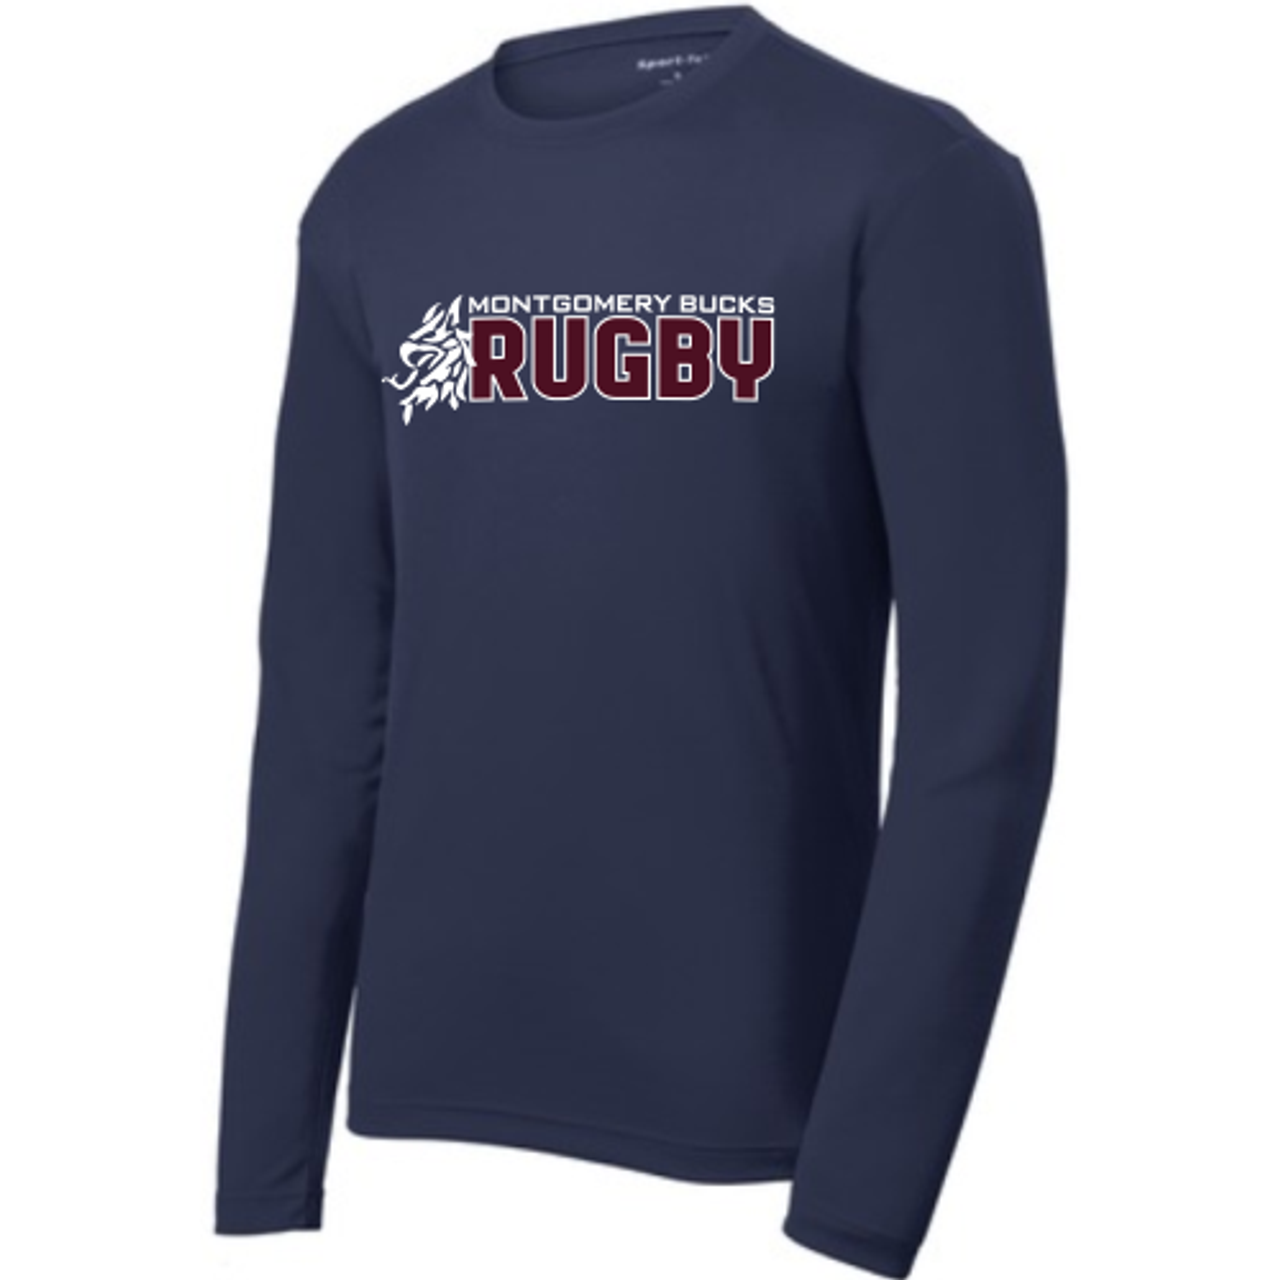 MB Rugby Performance Tee, Navy